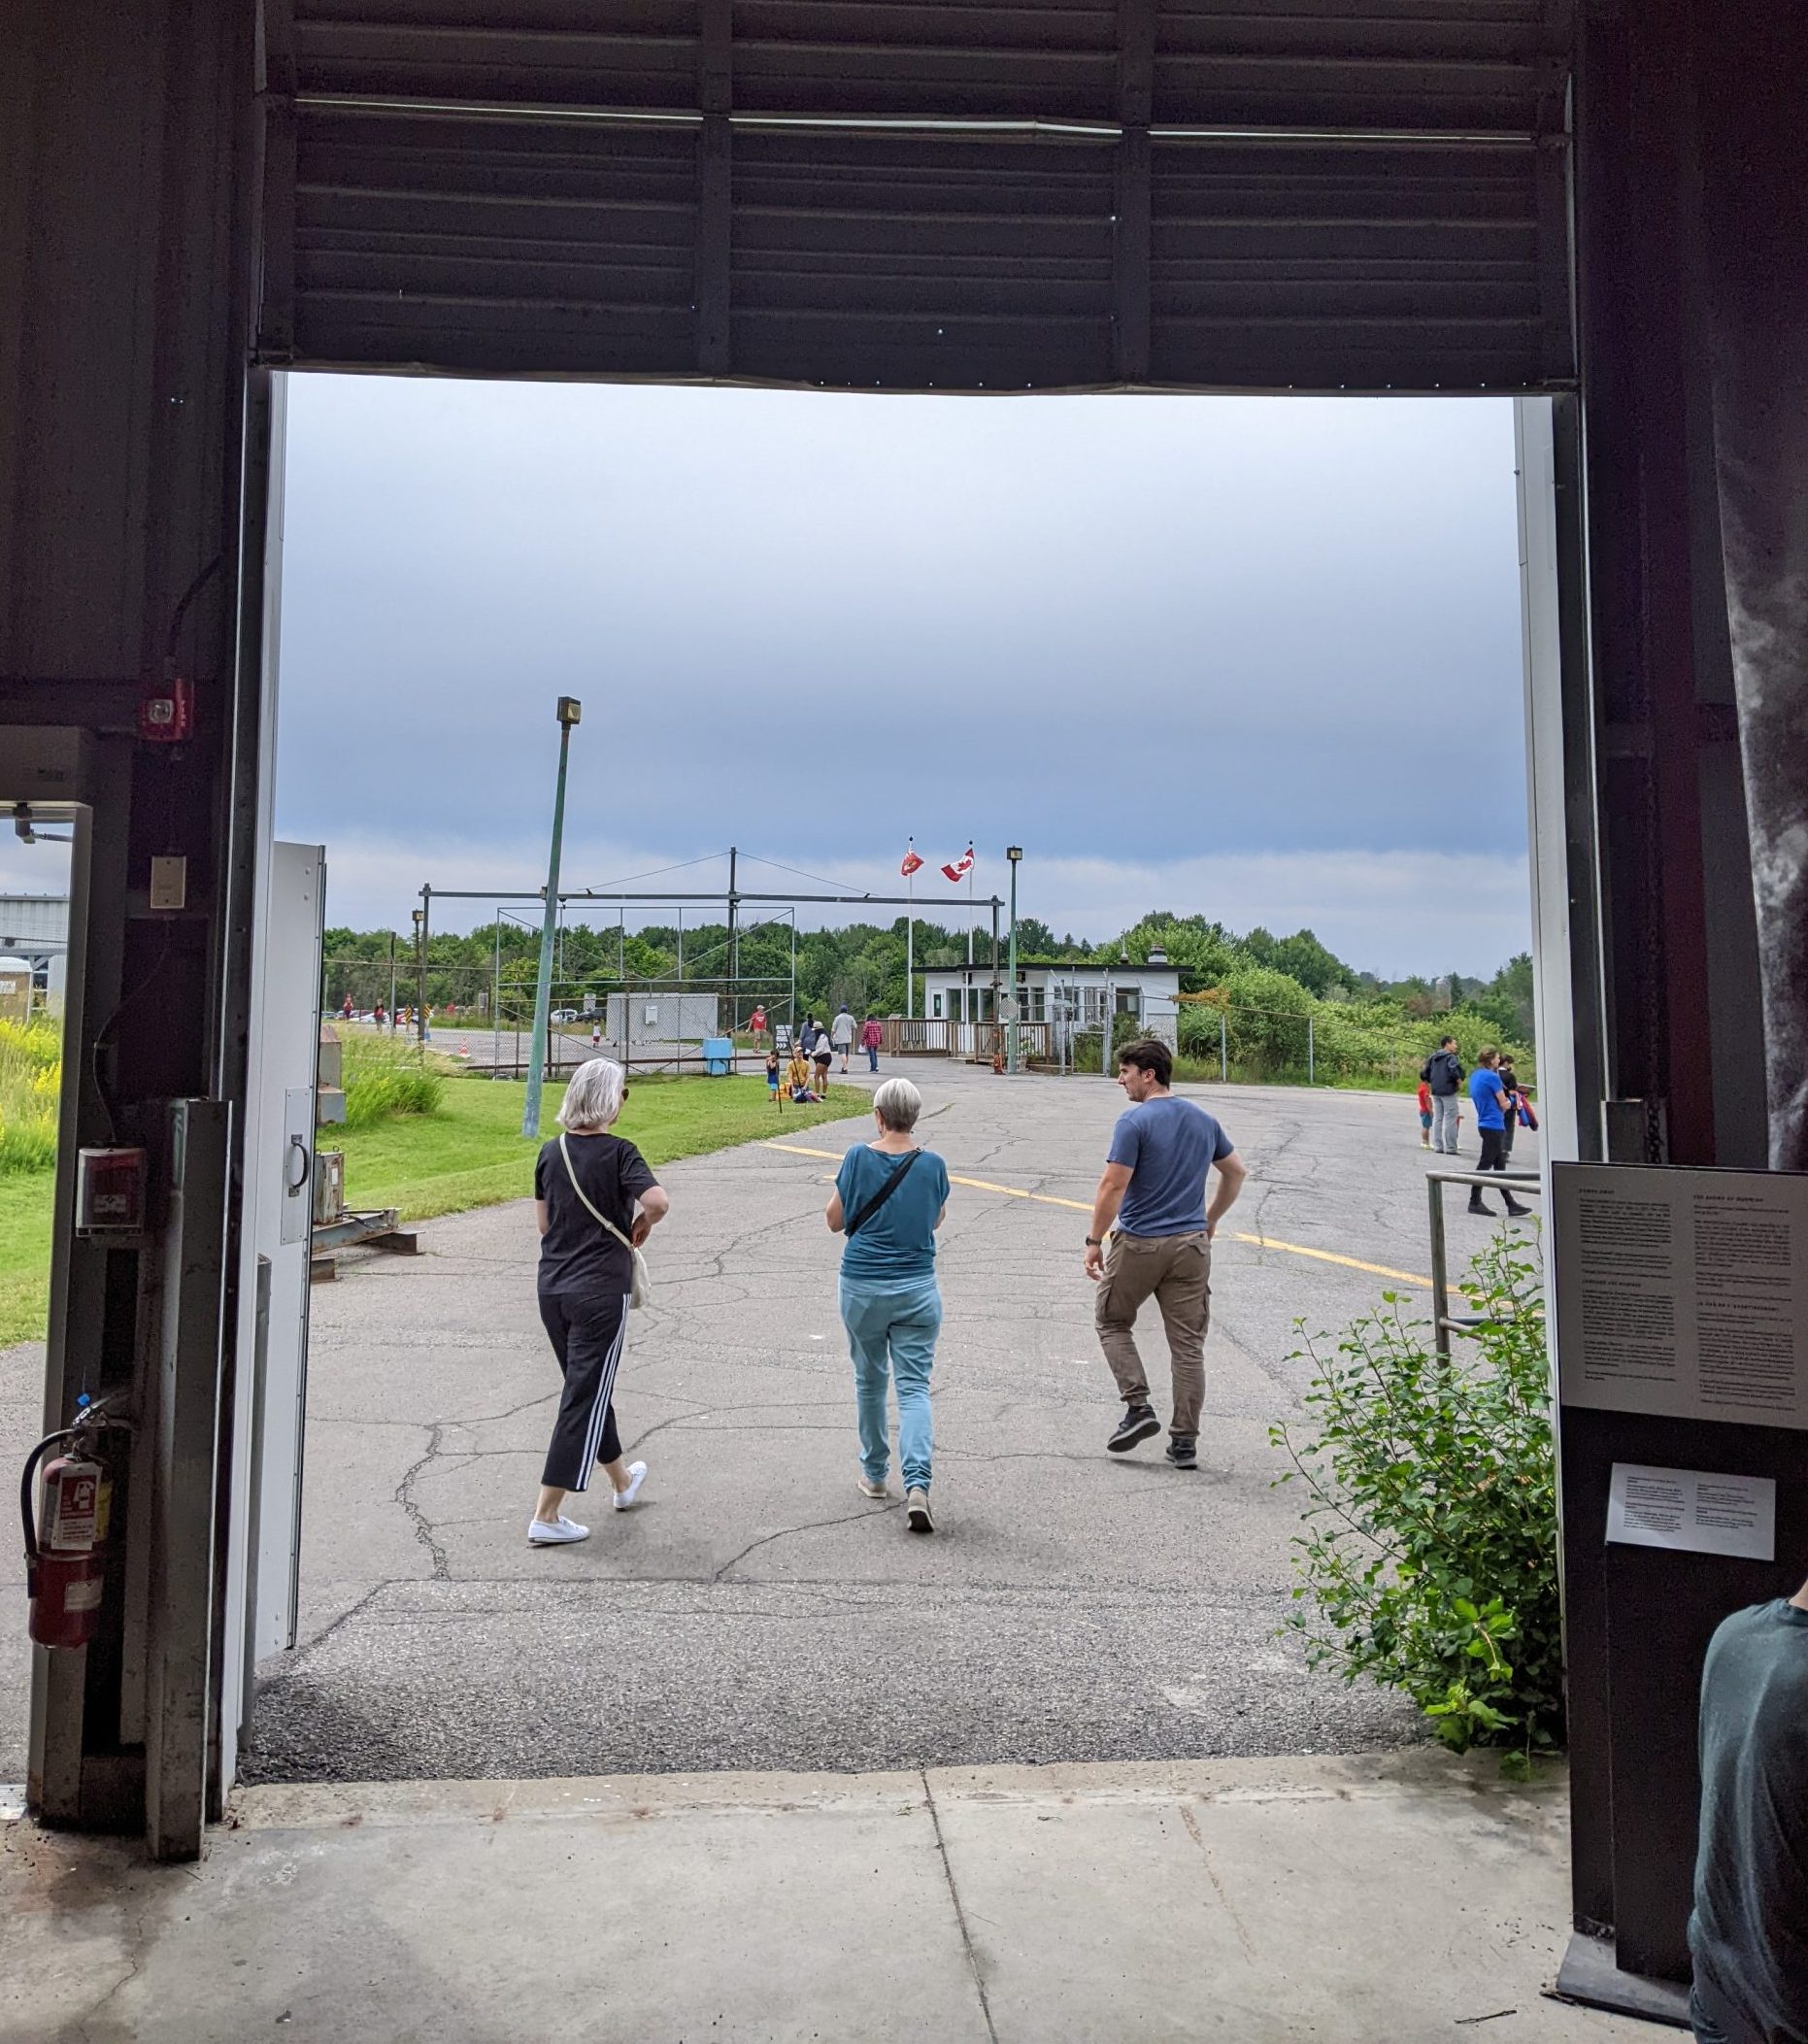 Visitors walk through the large garage door entrance to the Diefenbunker.